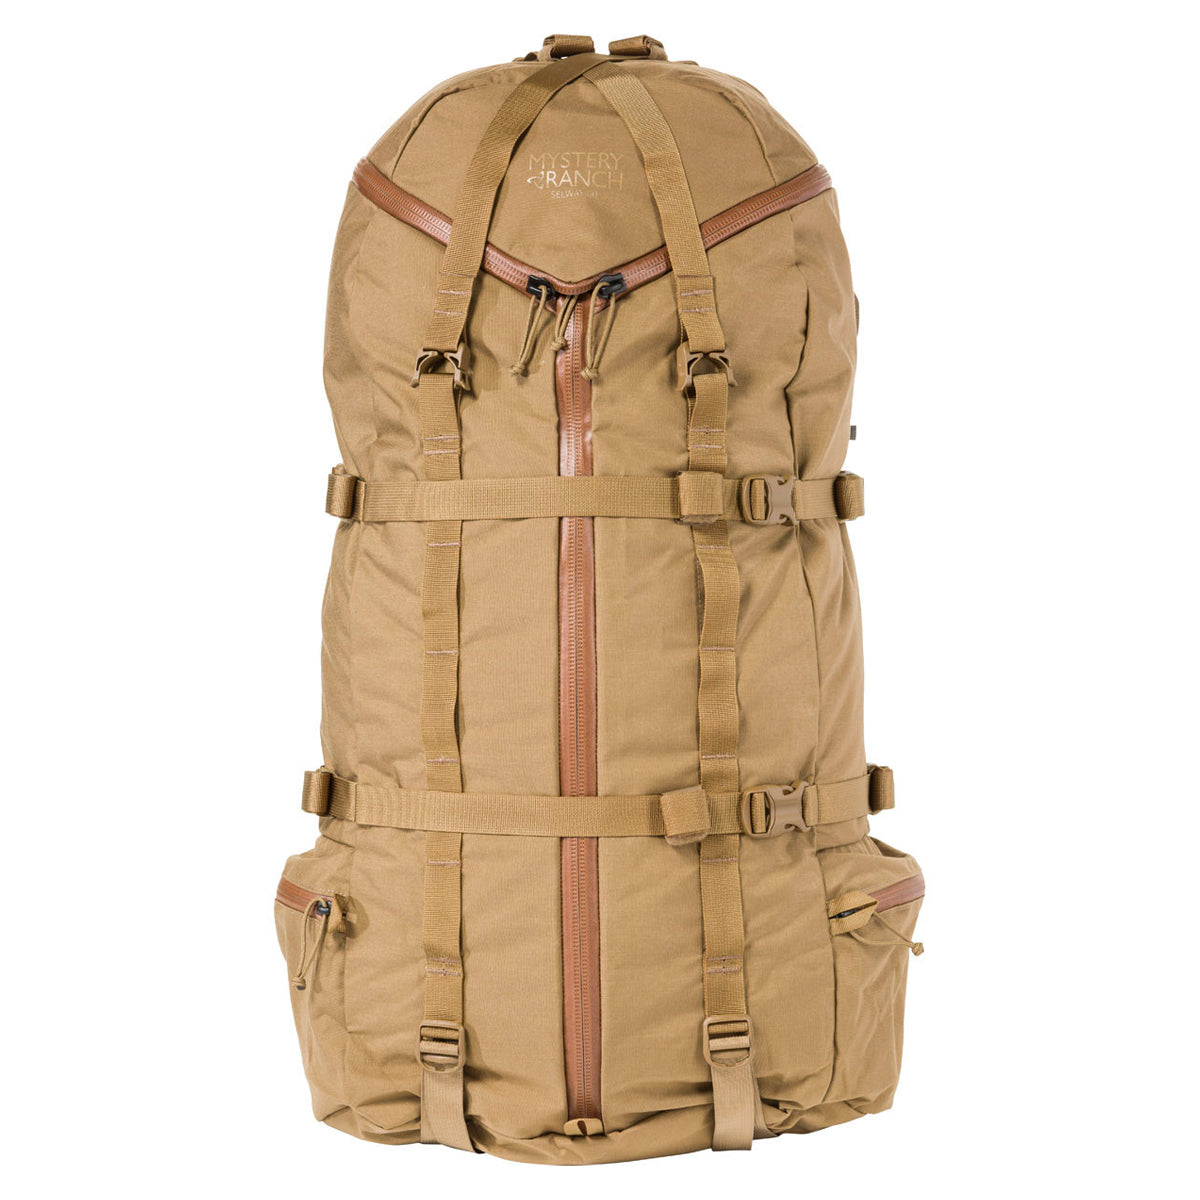 Mystery Ranch Selway 60 Backpack (2019) in Mystery Ranch Selway 60 Backpack (2019) by Mystery Ranch | Gear - goHUNT Shop by GOHUNT | Mystery Ranch - GOHUNT Shop